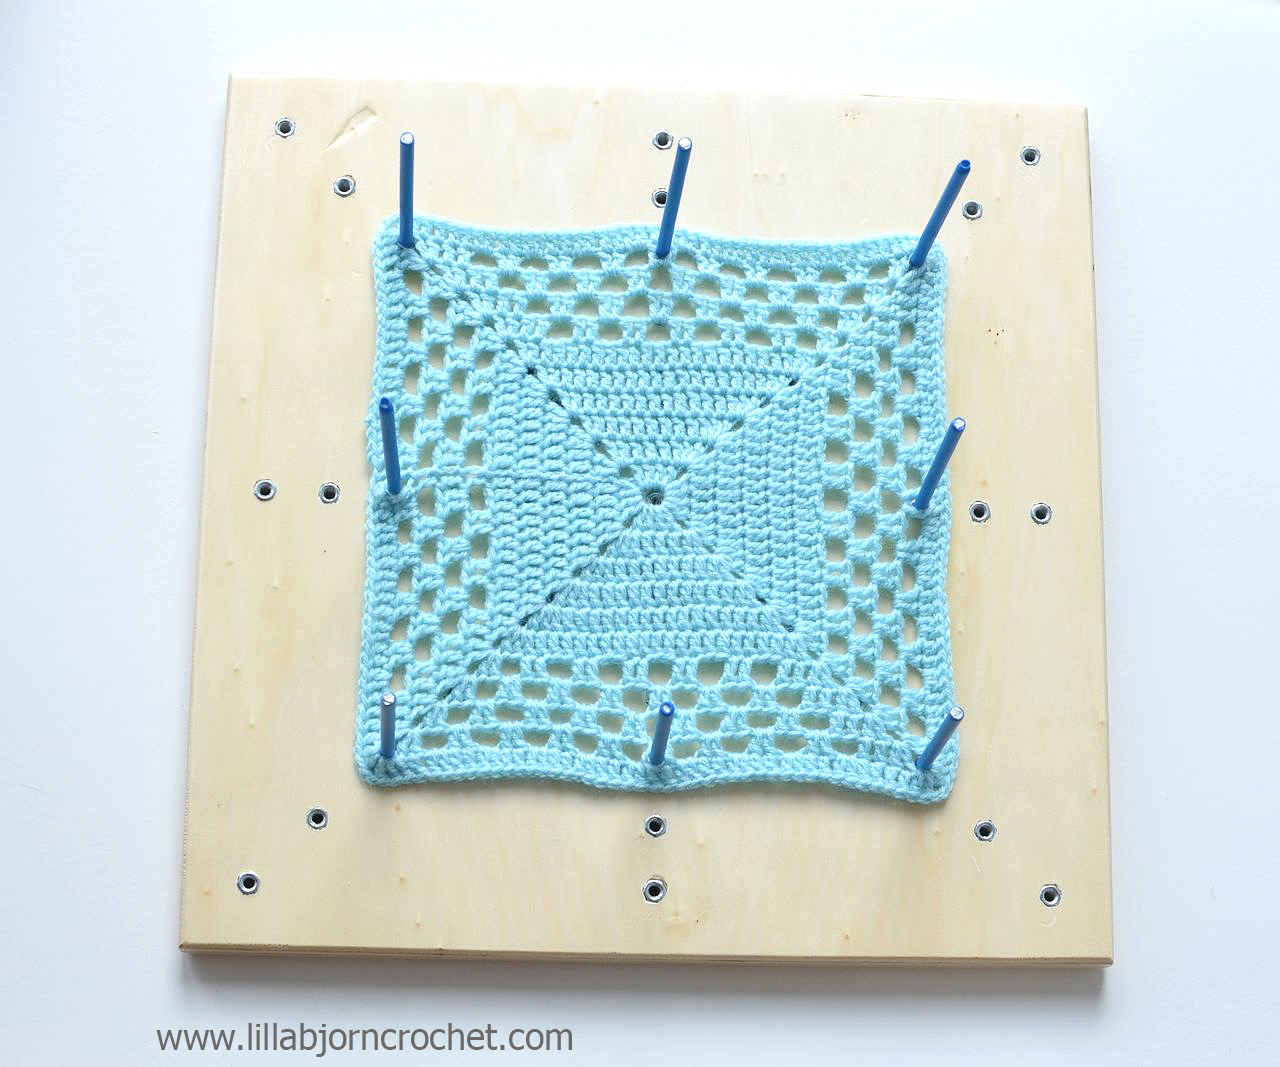 Everything You Need To Know About Blocking Crochet